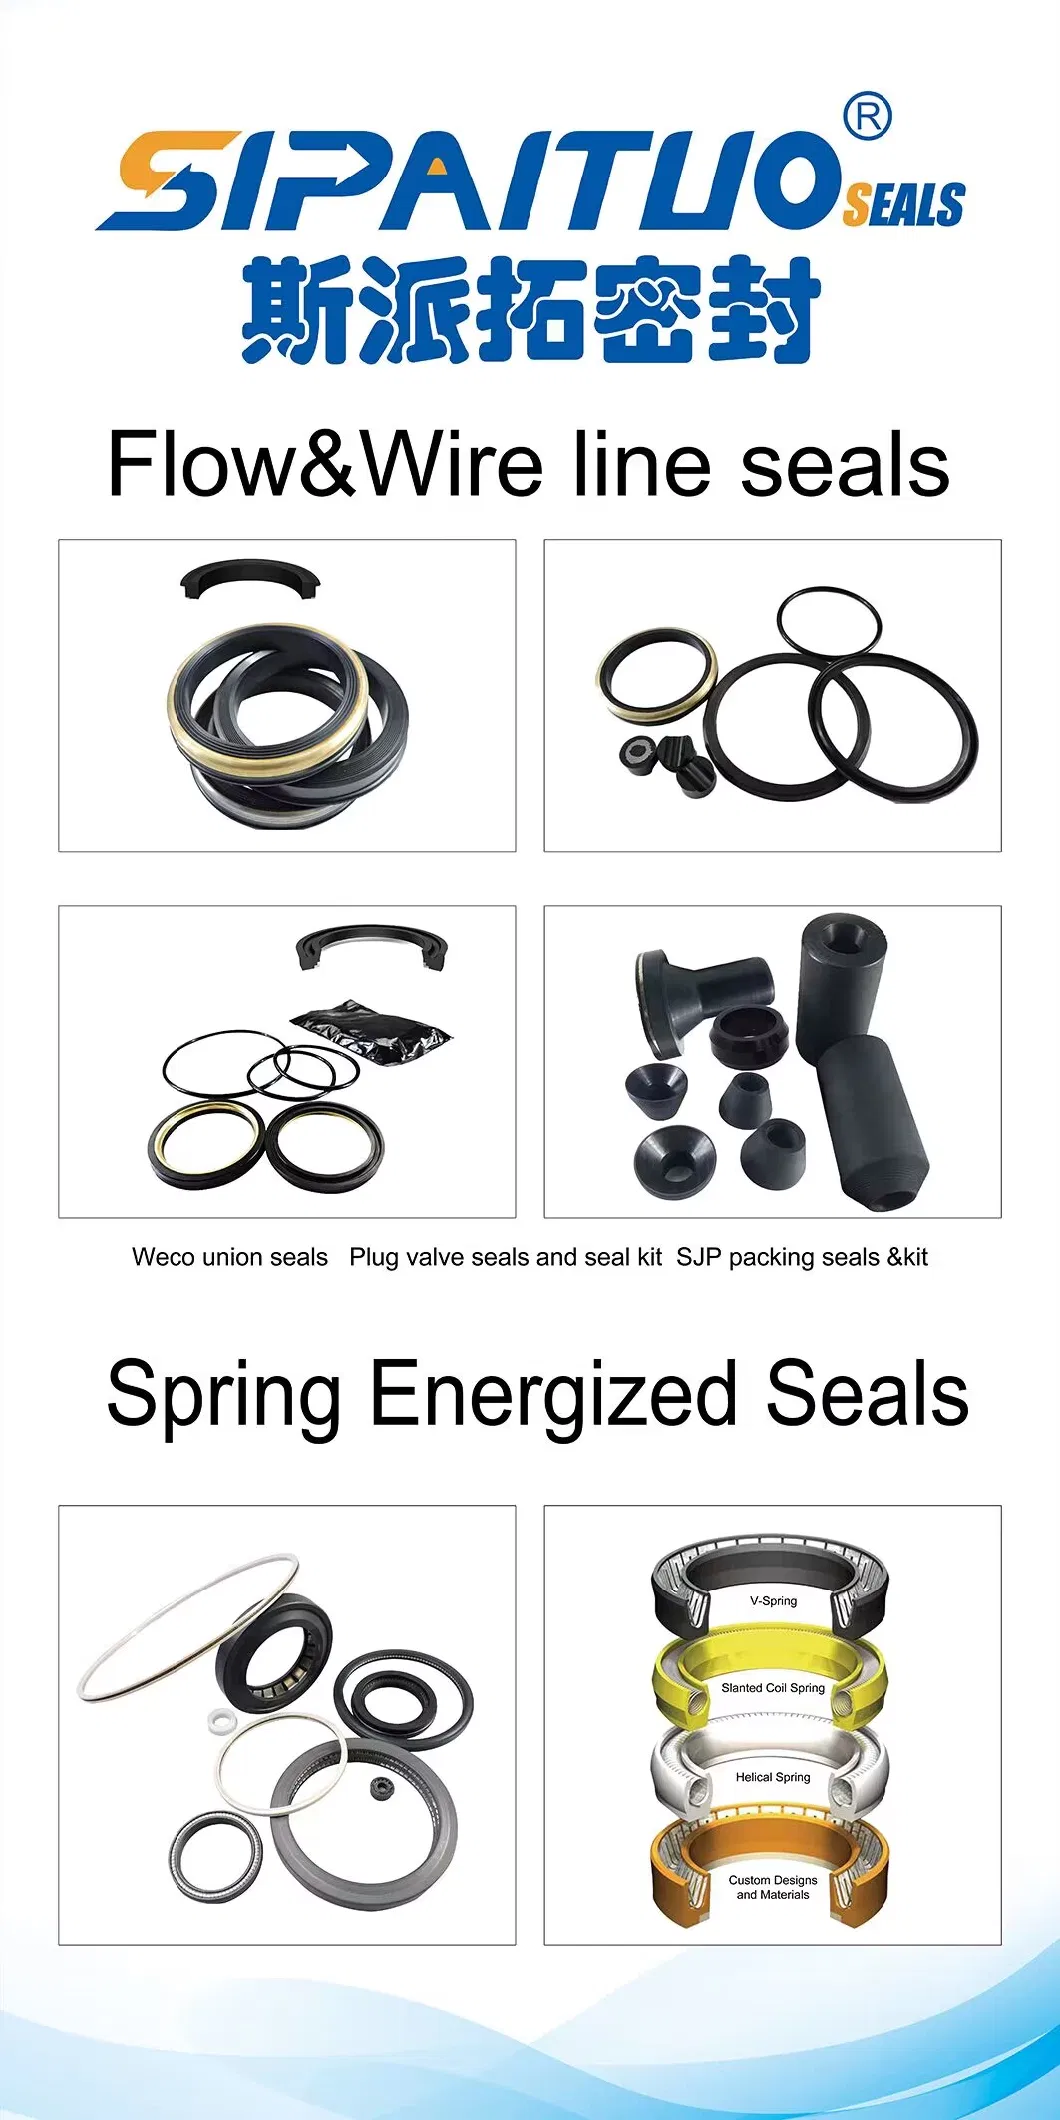 Water Pump Rubber Oil Seal, Hard Plastic Ring for Washing Machine Parts